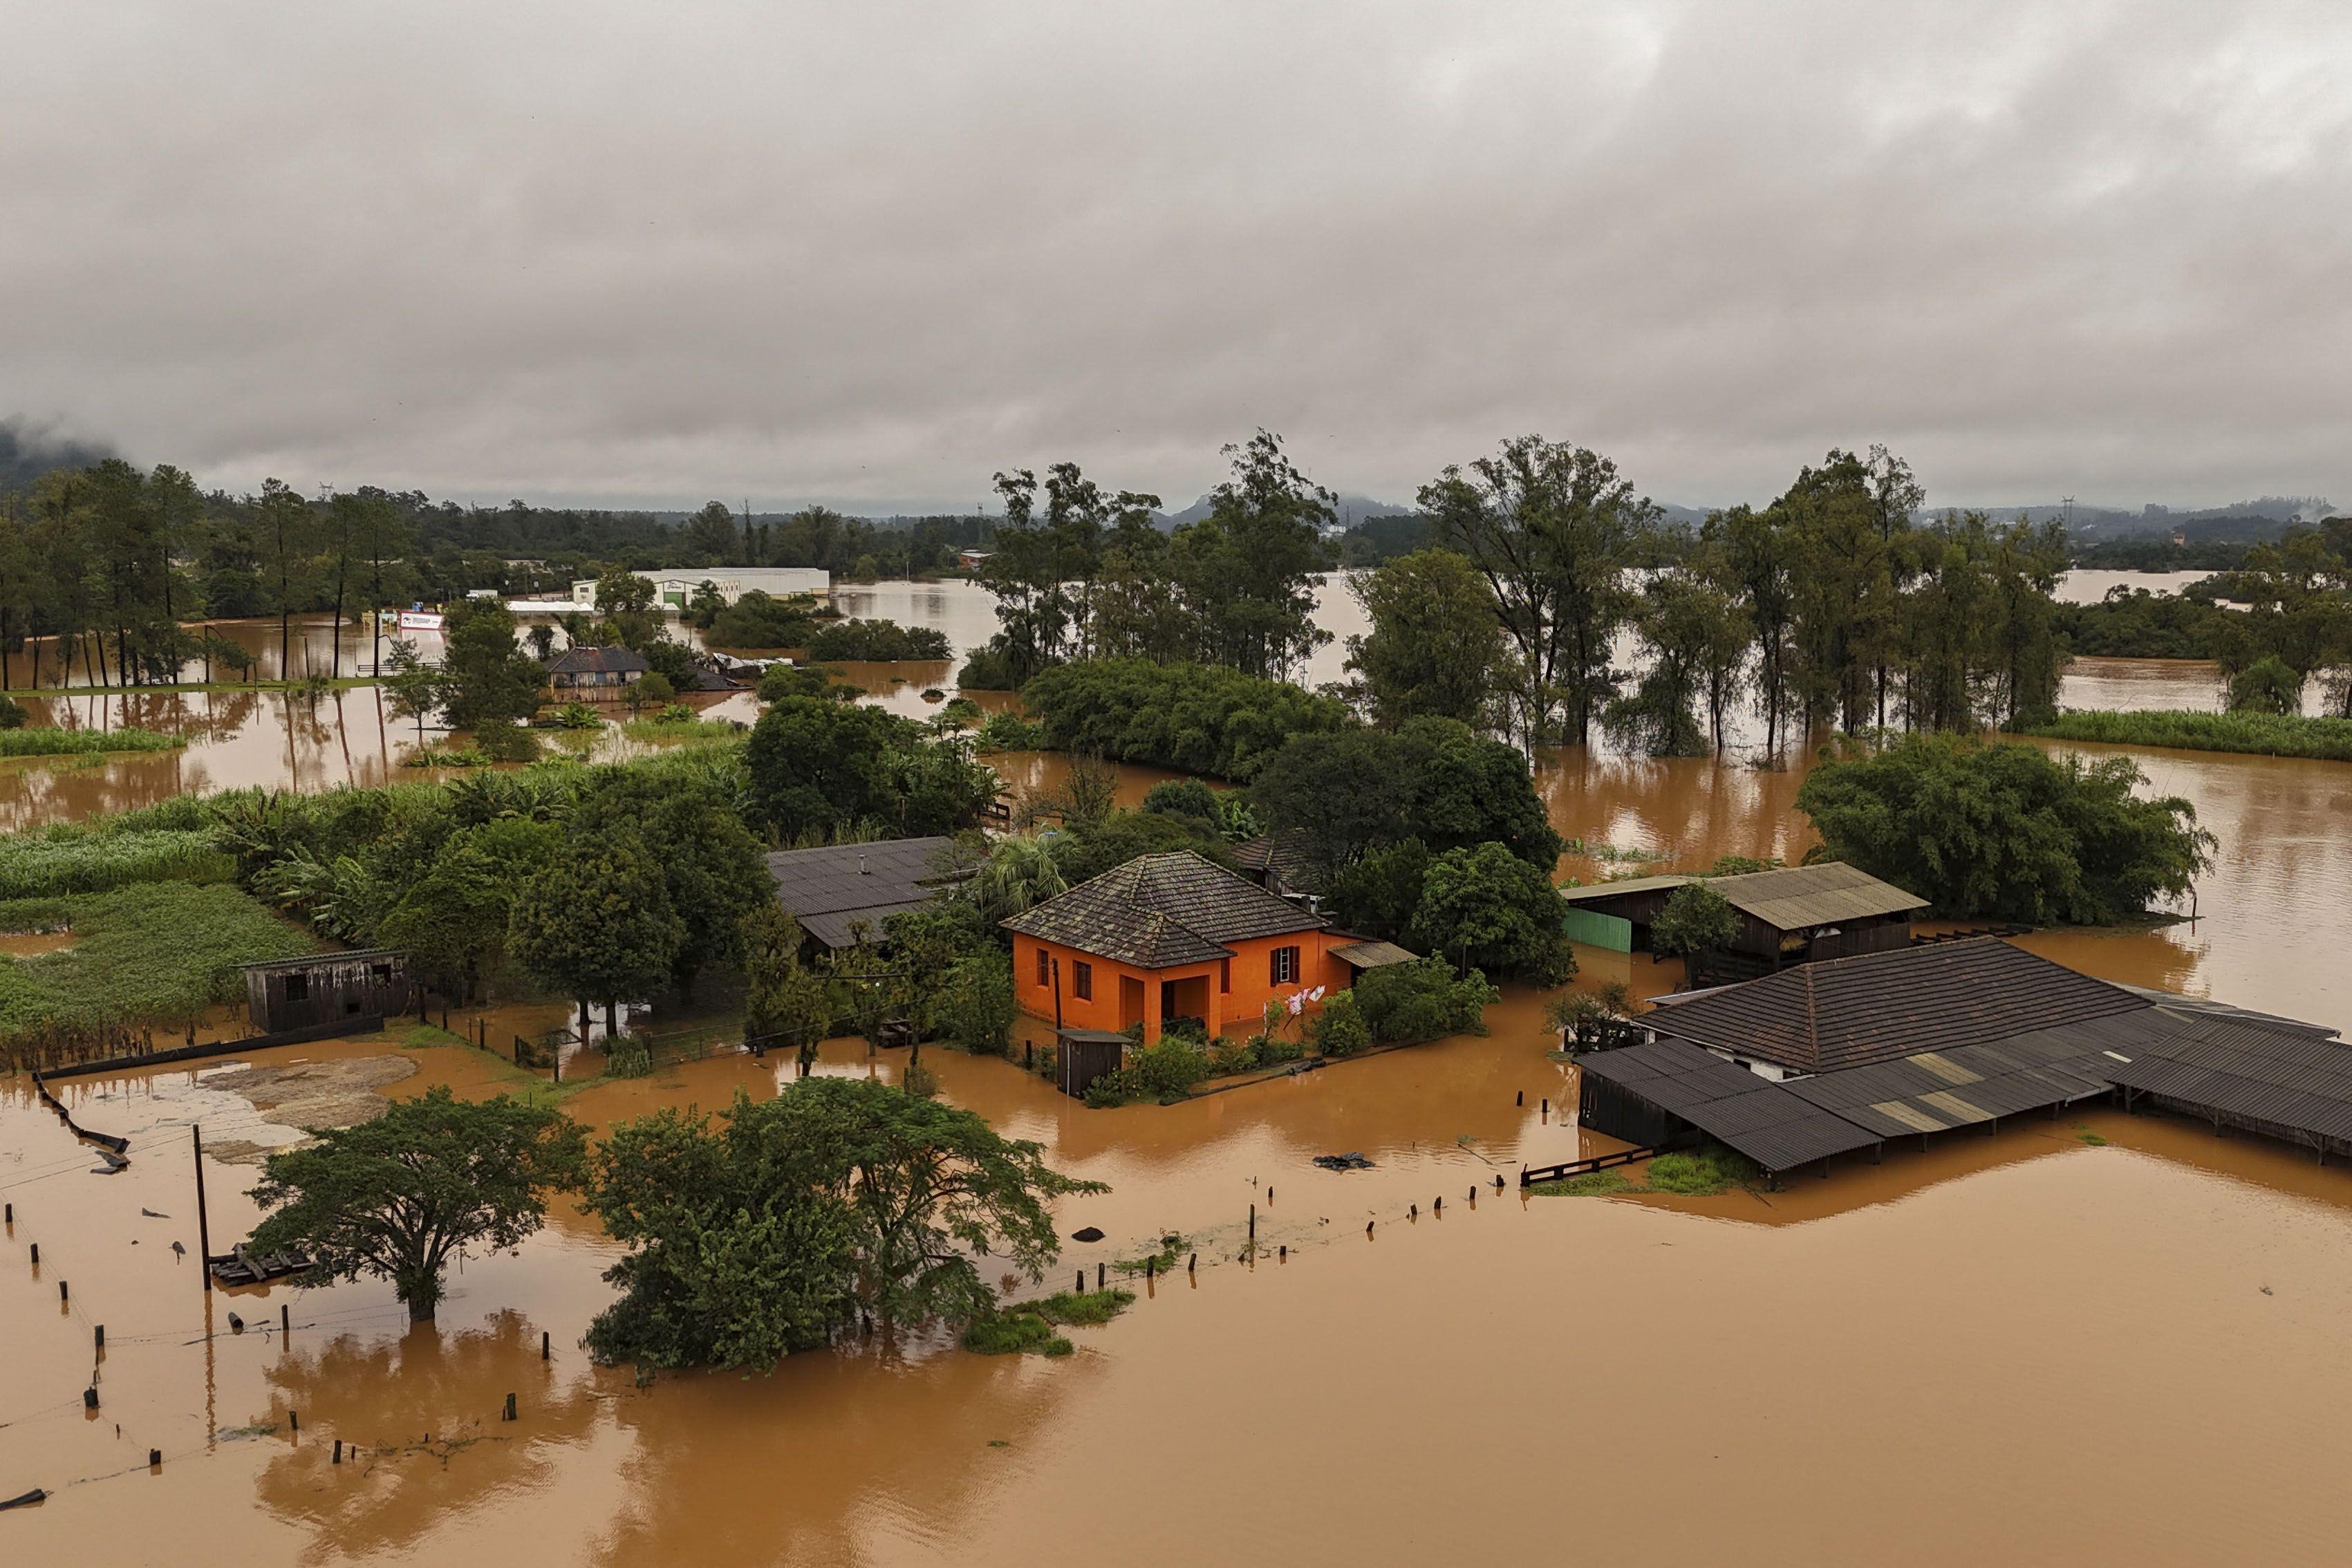 Deadly Flood in Brazil as Over 30 Lives lost in Dam Collapse